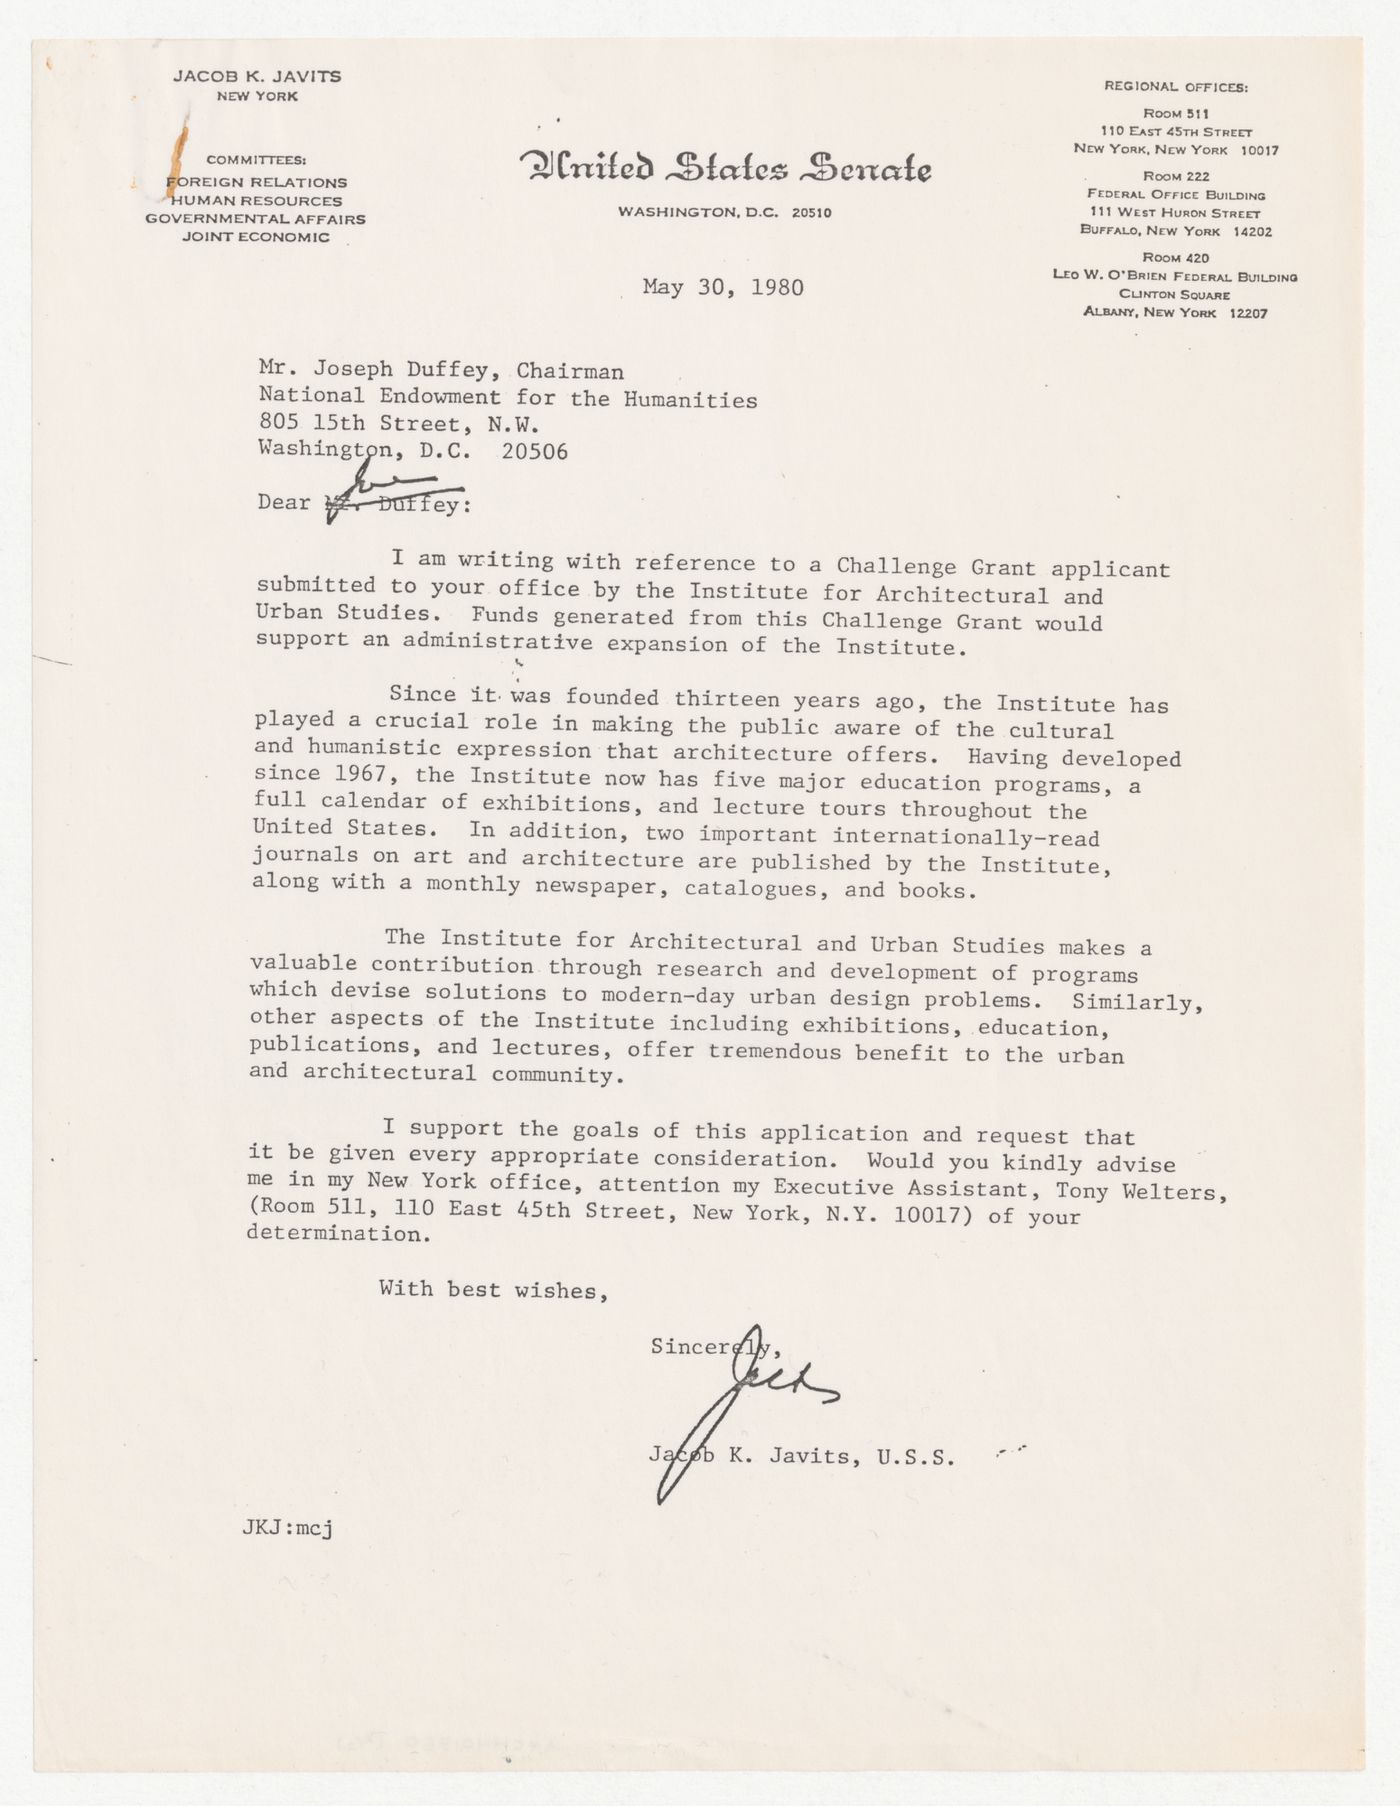 Letter from Jacob K. Javits to Joseph Duffey about Challenge Grant application with attached memorandum from Joan Silverman dated June 11th, 1980